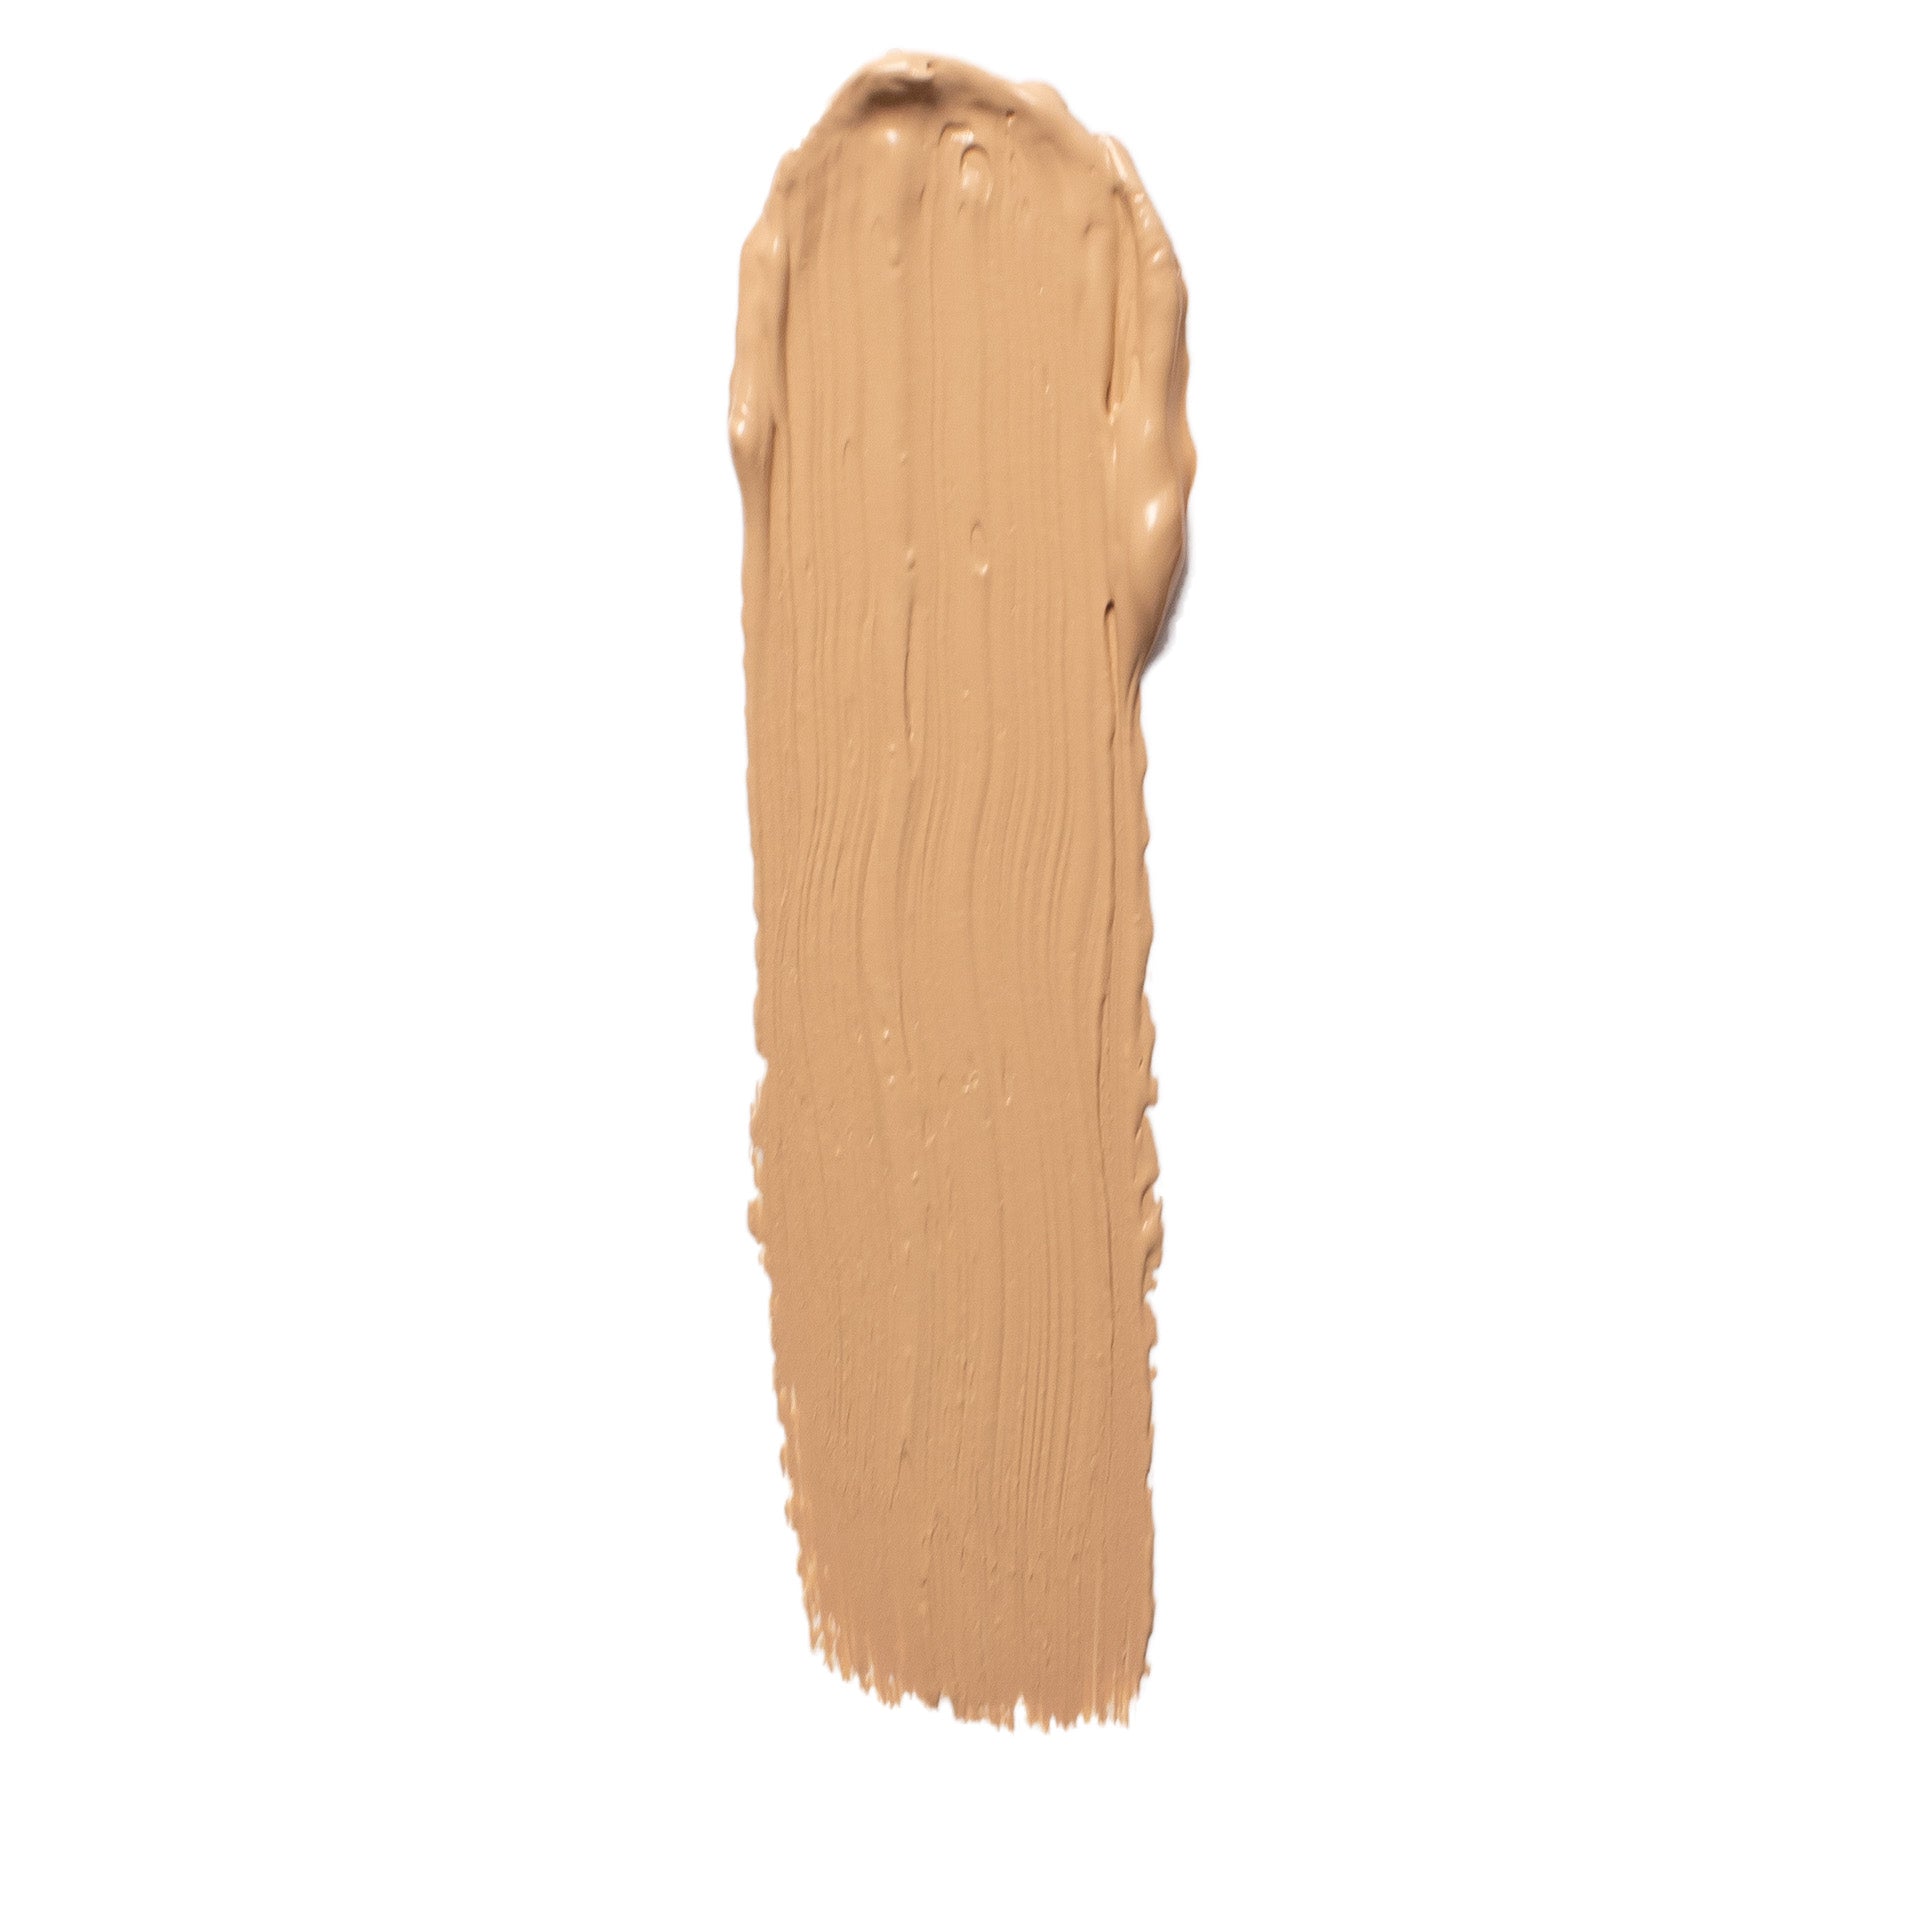 bPerfect CHROMA Cover Matte Foundation, W5 swatch